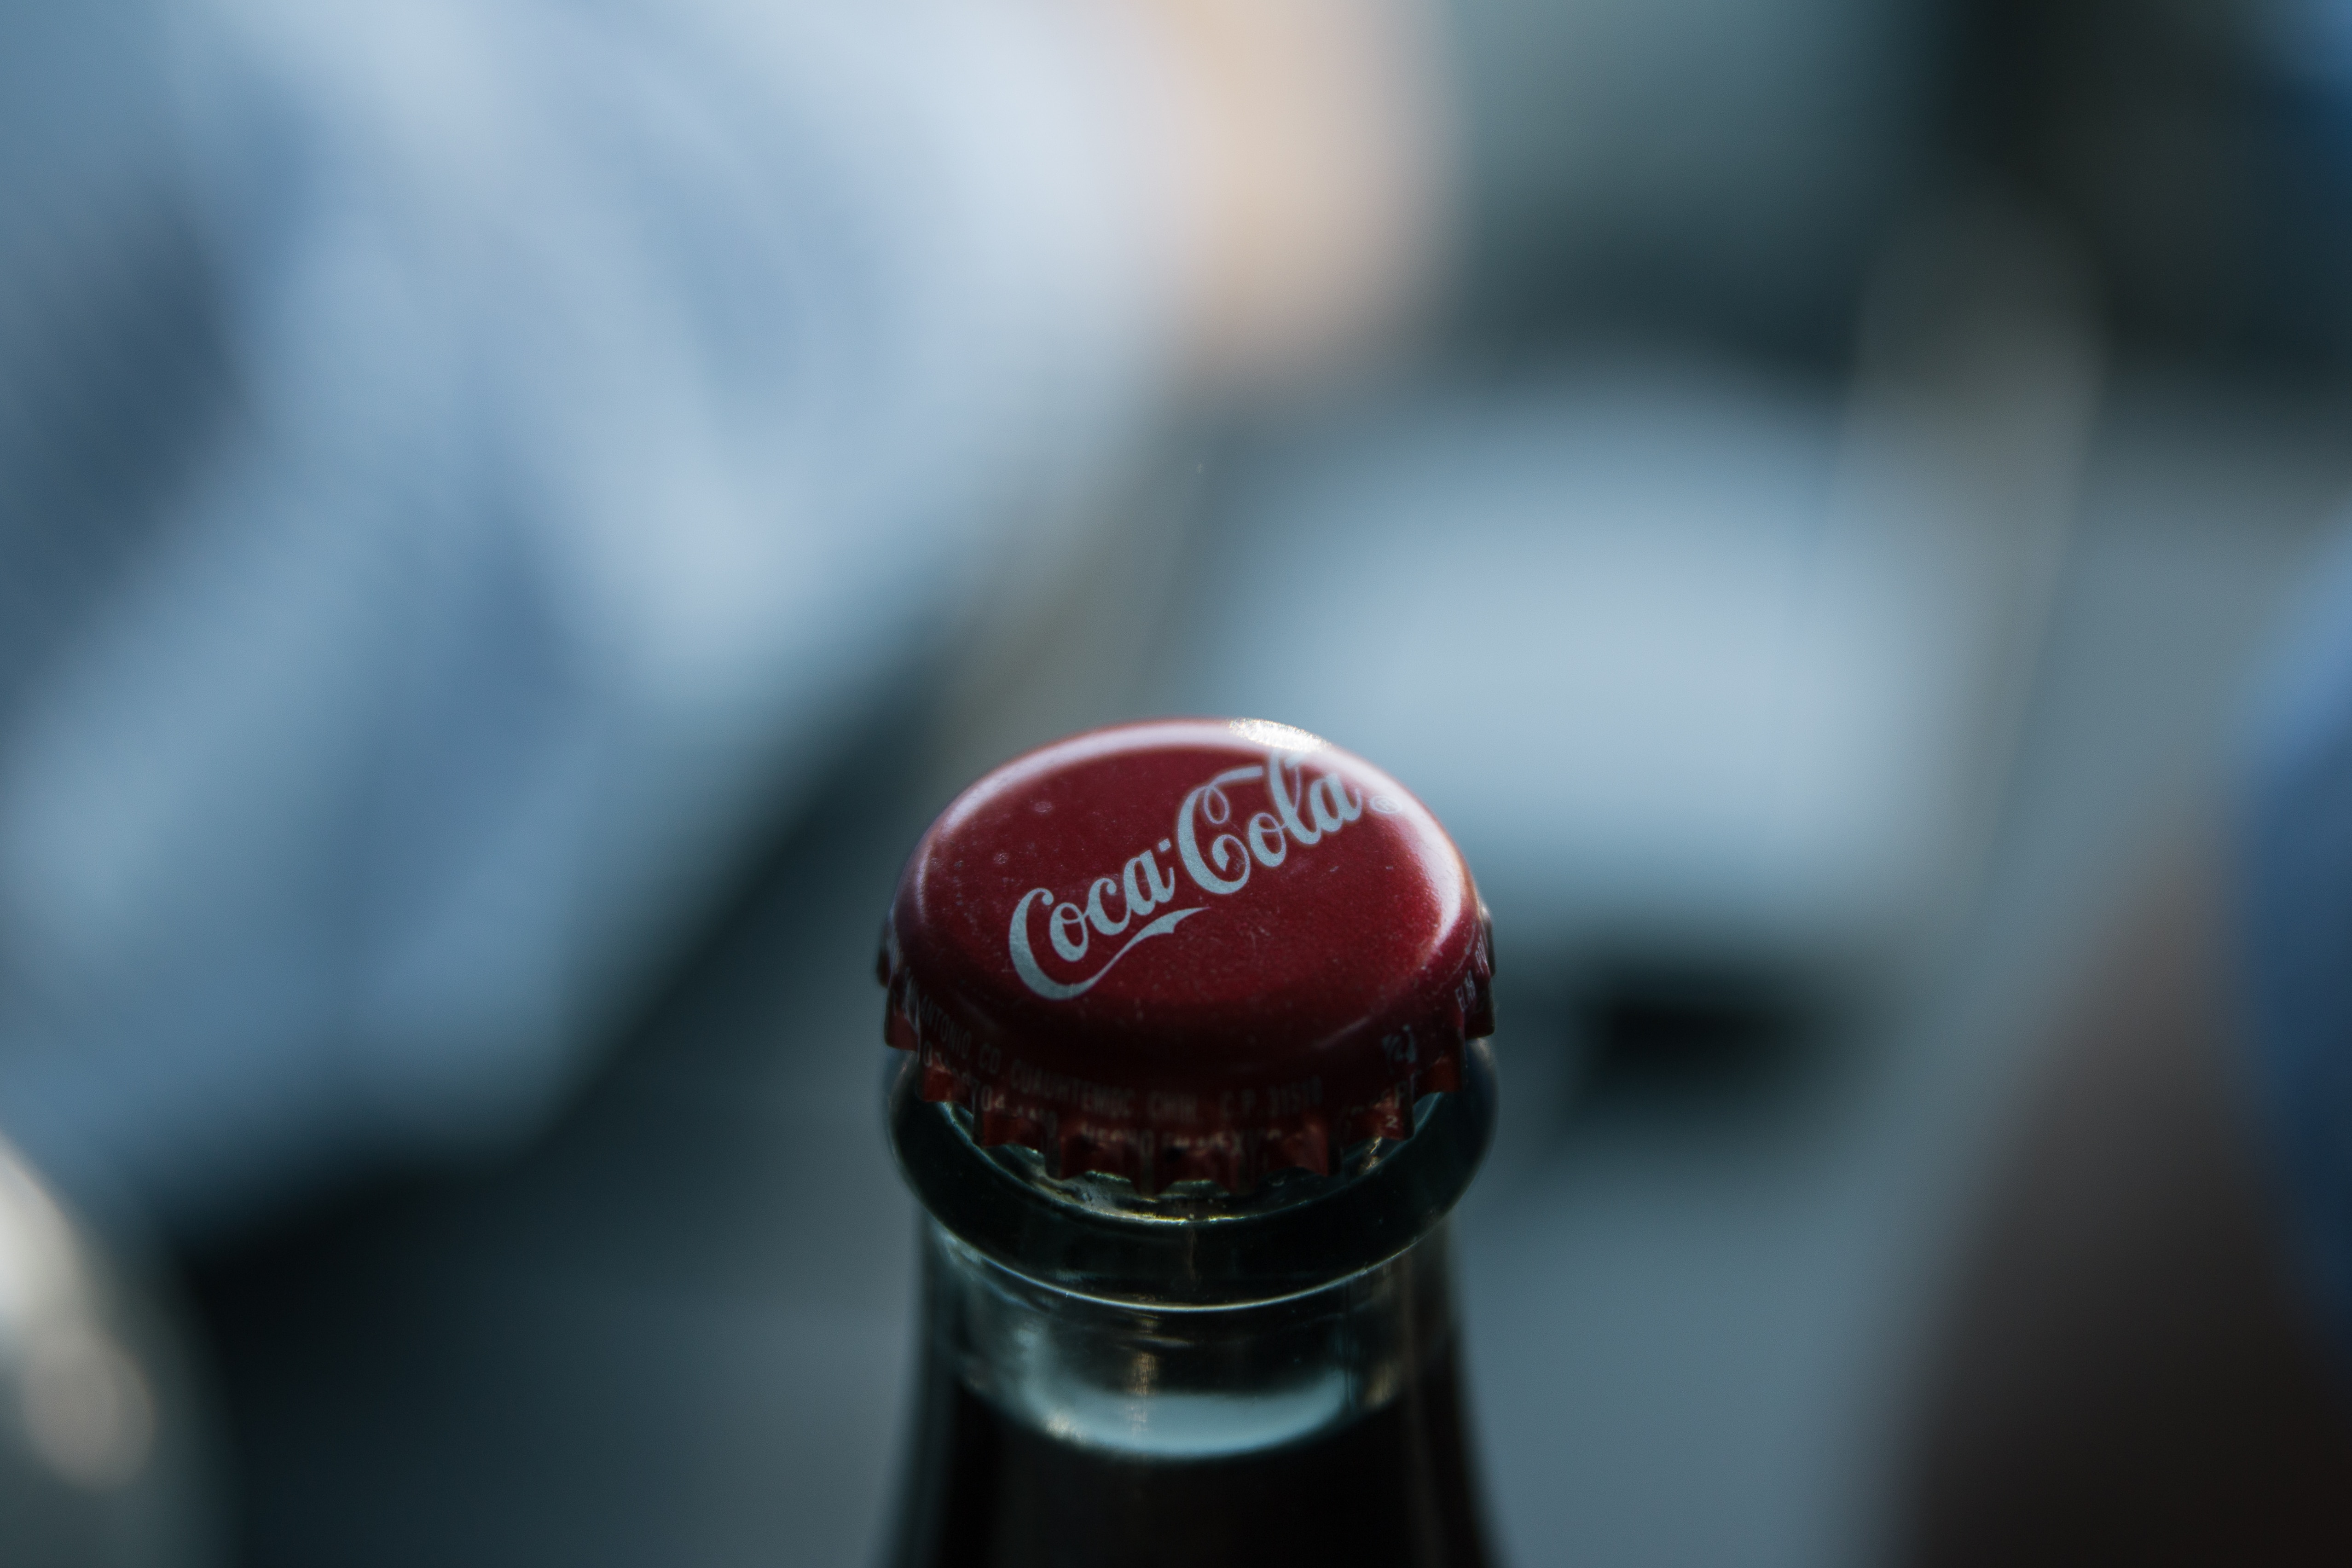 selective focus photography of coca cola bottle crown